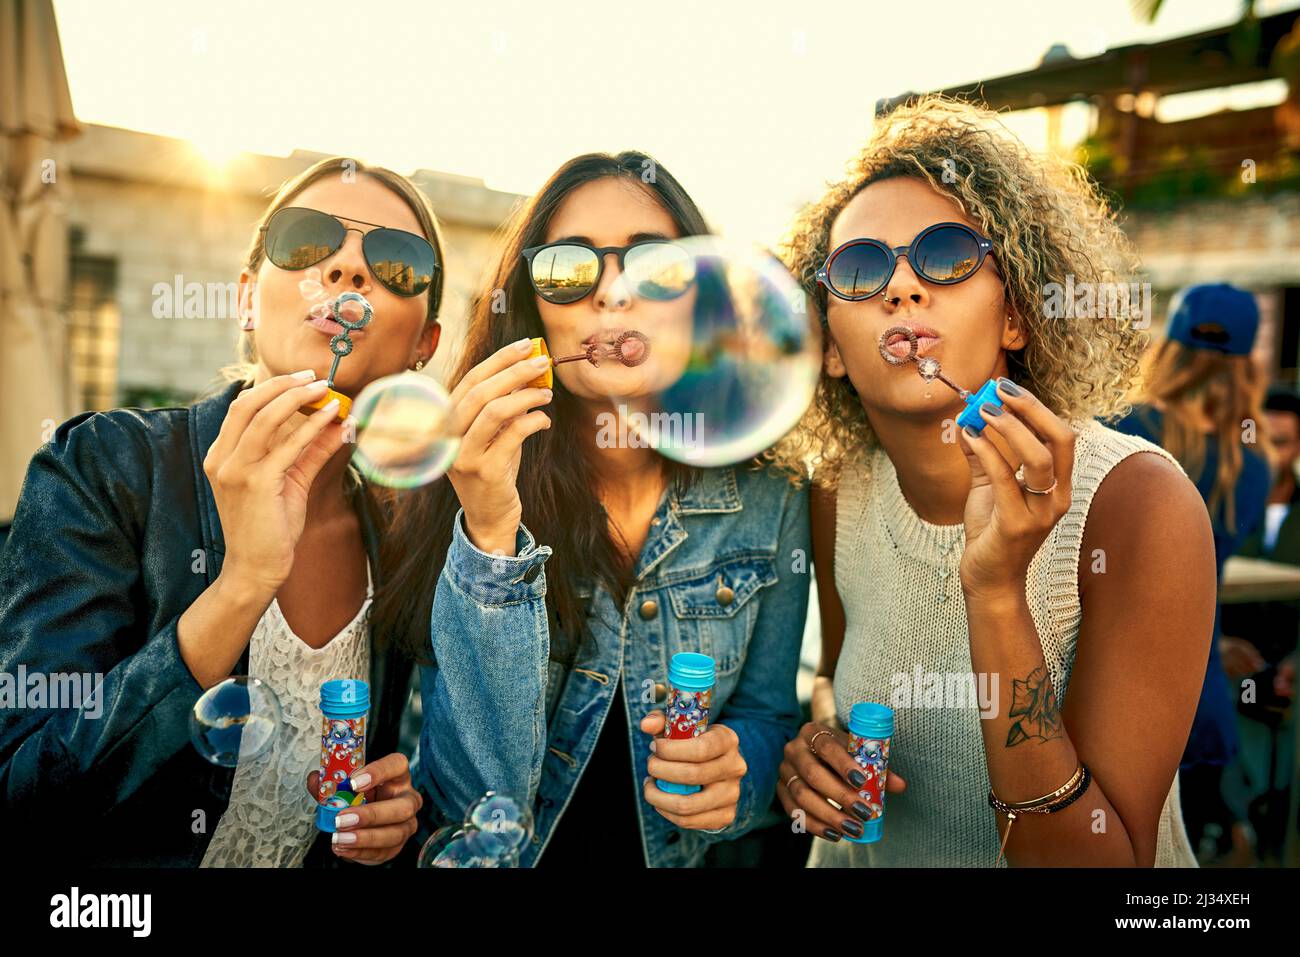 No moment spent blowing bubbles was ever wasted. Shot of a group of young women blowing bubbles together outdoors. Stock Photo